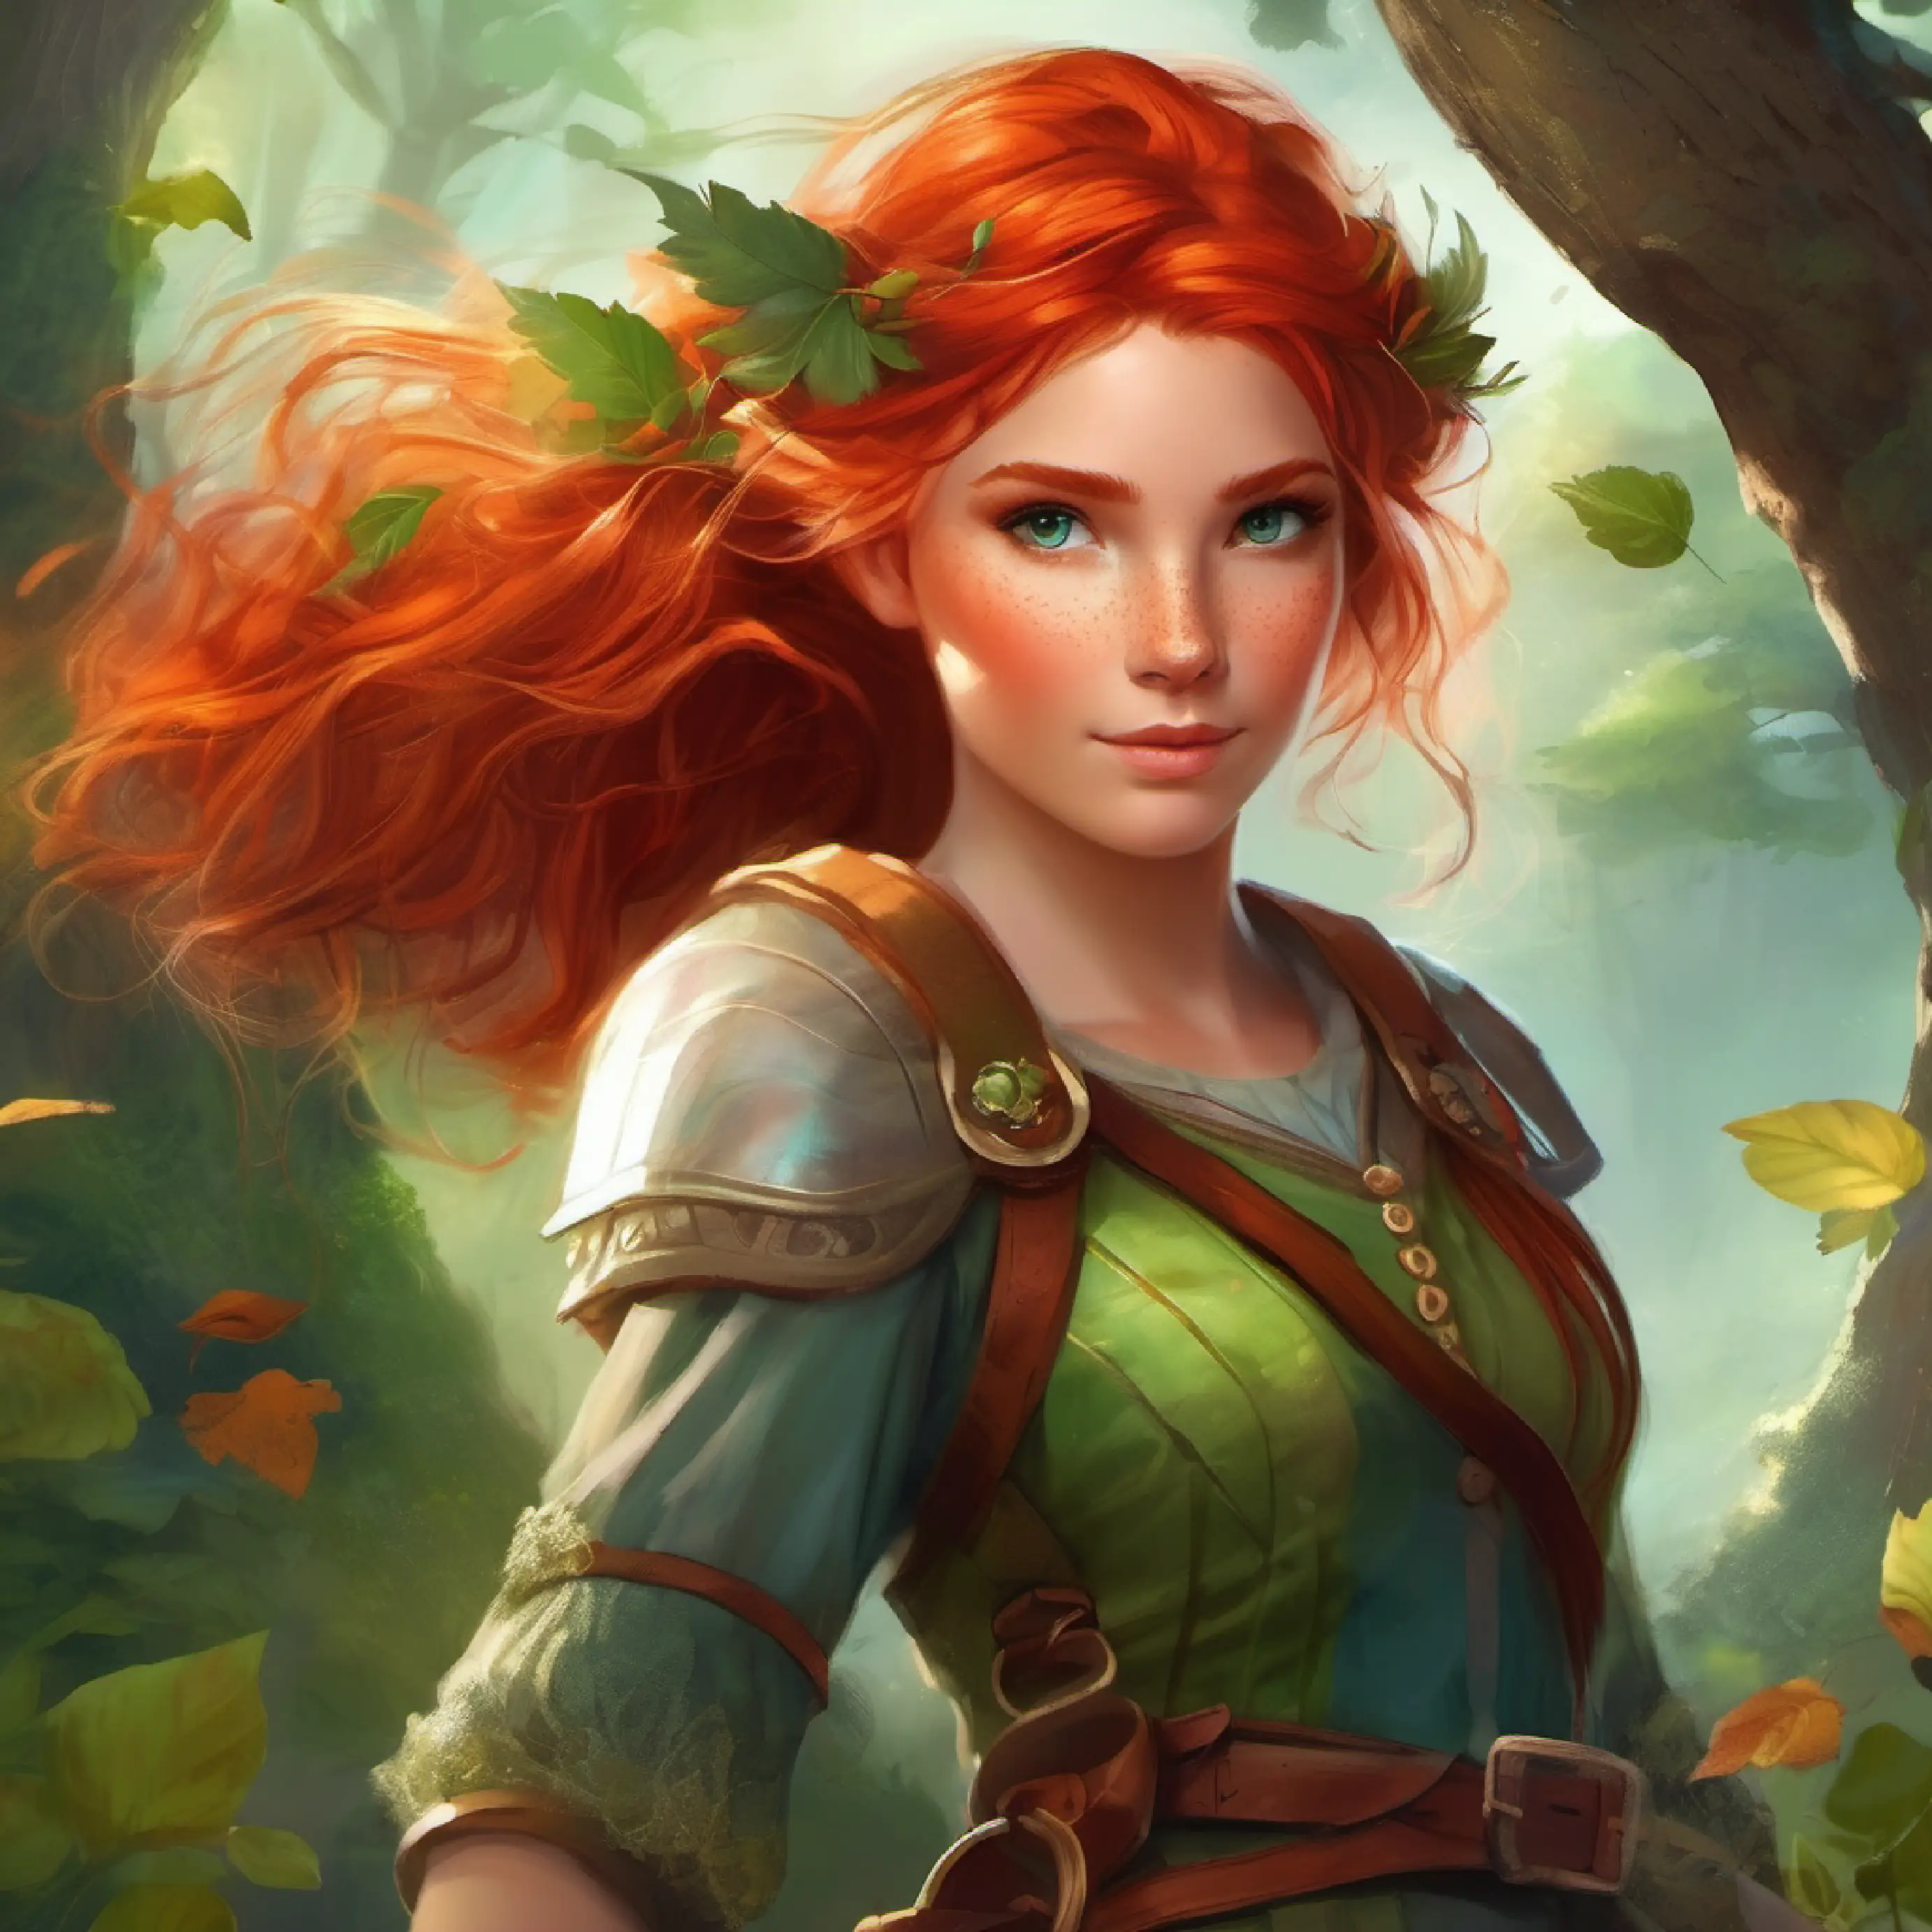 Brave girl with freckles, green eyes, and wild red hair preparing for her adventure with Mischievous squirrel with bushy tail and bright, beady eyes